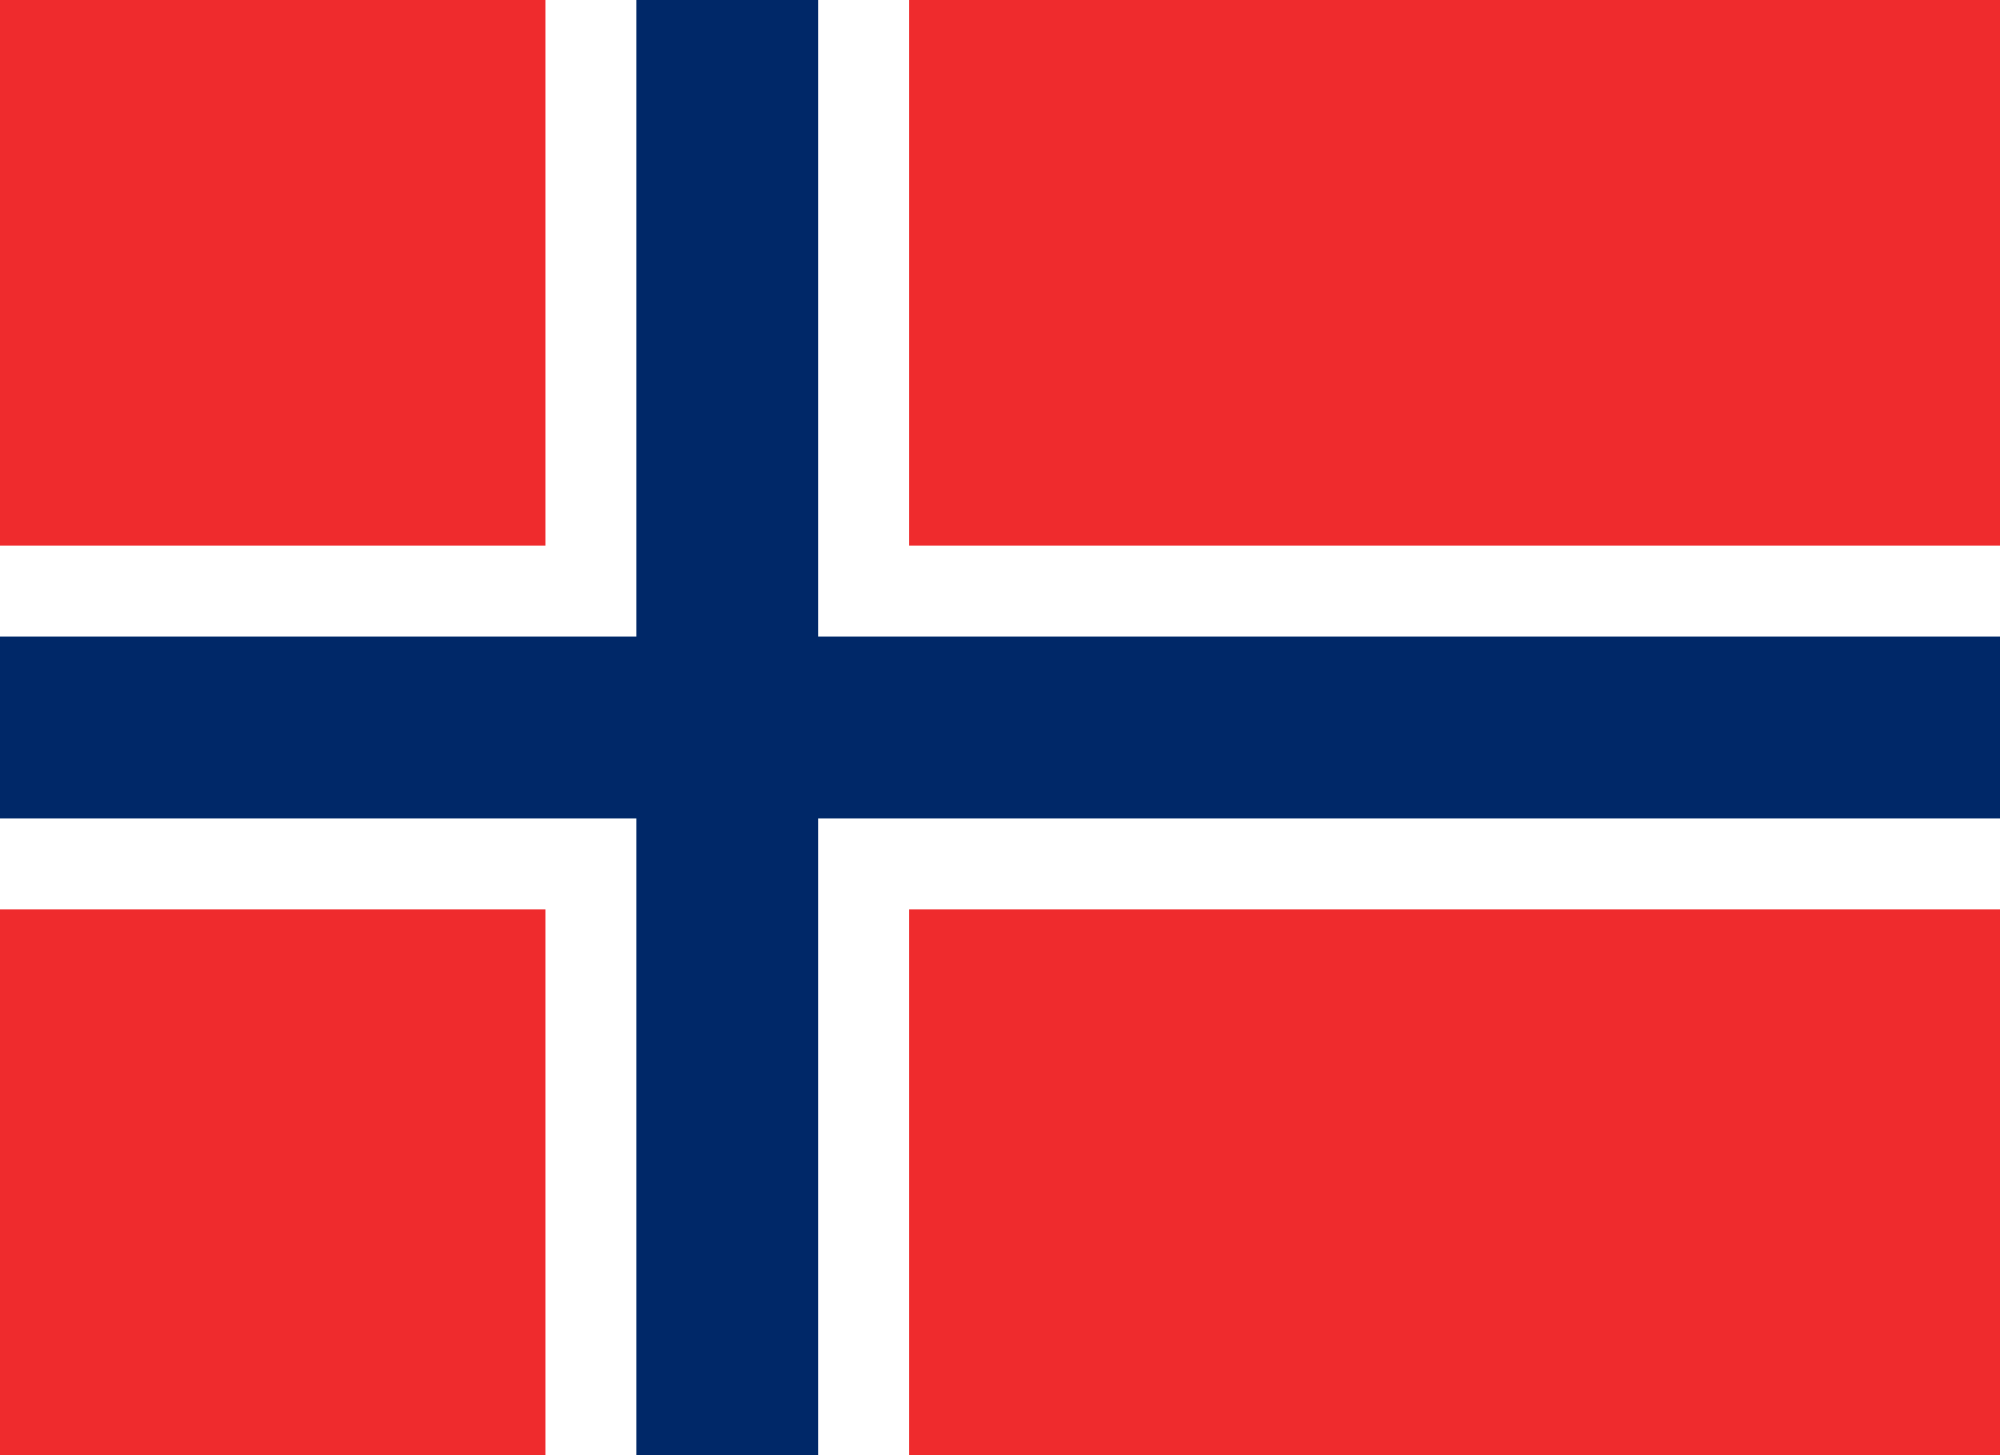 Norway: EGBA encourages transition to a licensing model for online gambling